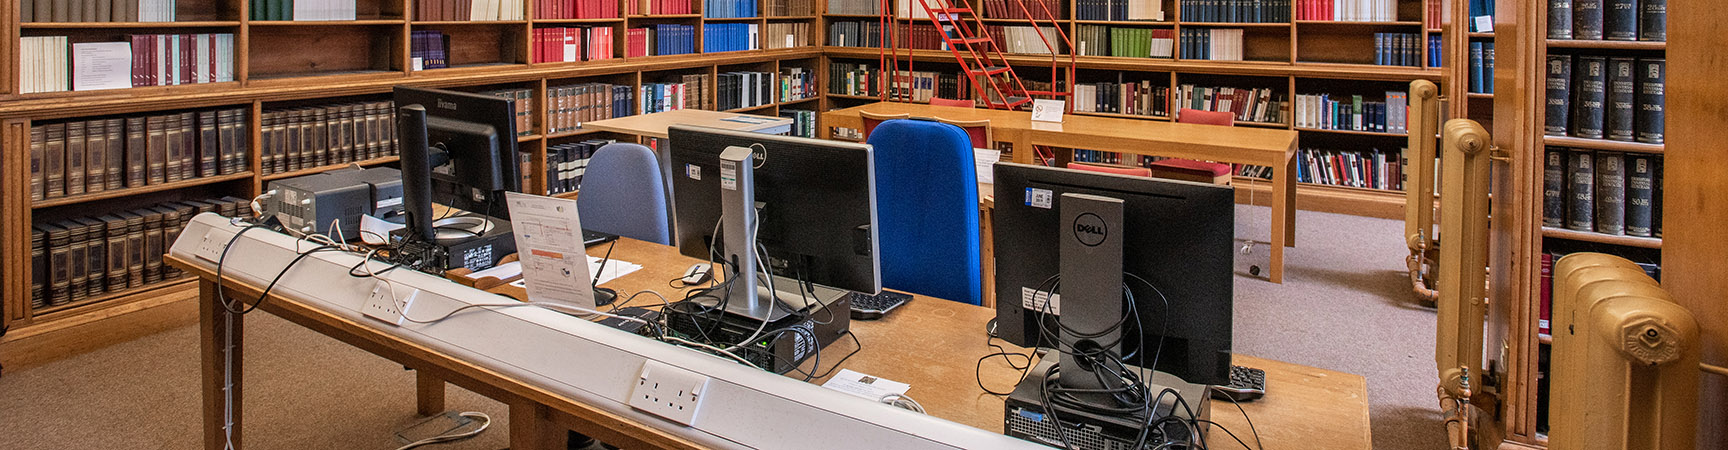 A row of desktop computer on a wooden desk with a bookshelf on the back wall